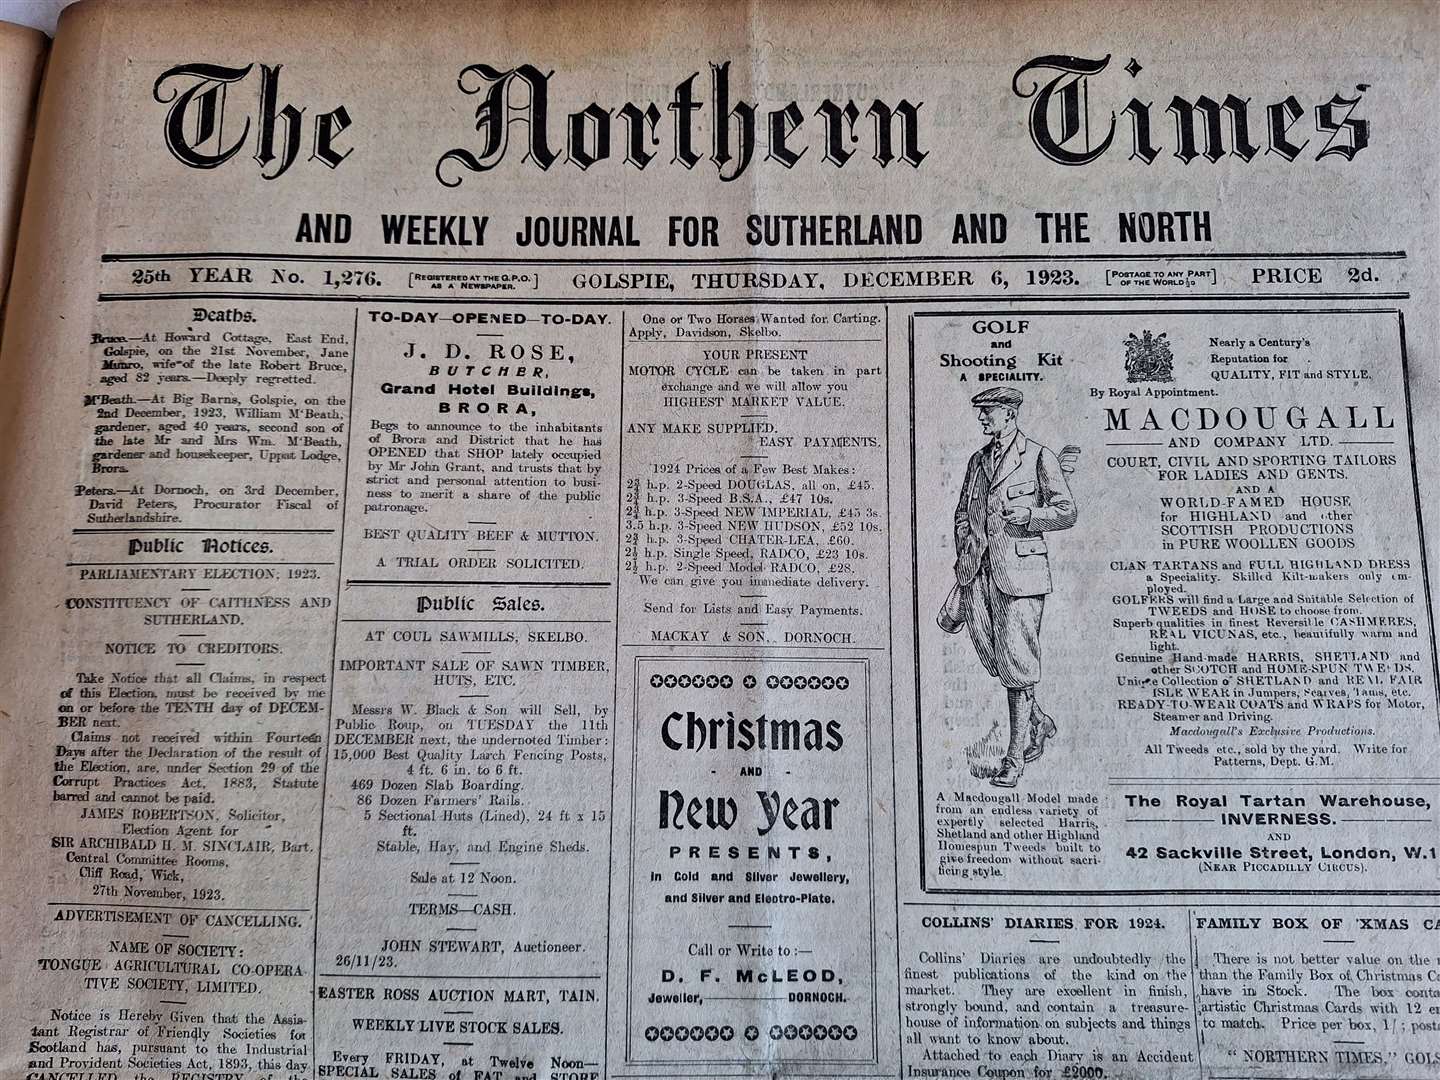 The edition of December 6, 1923.